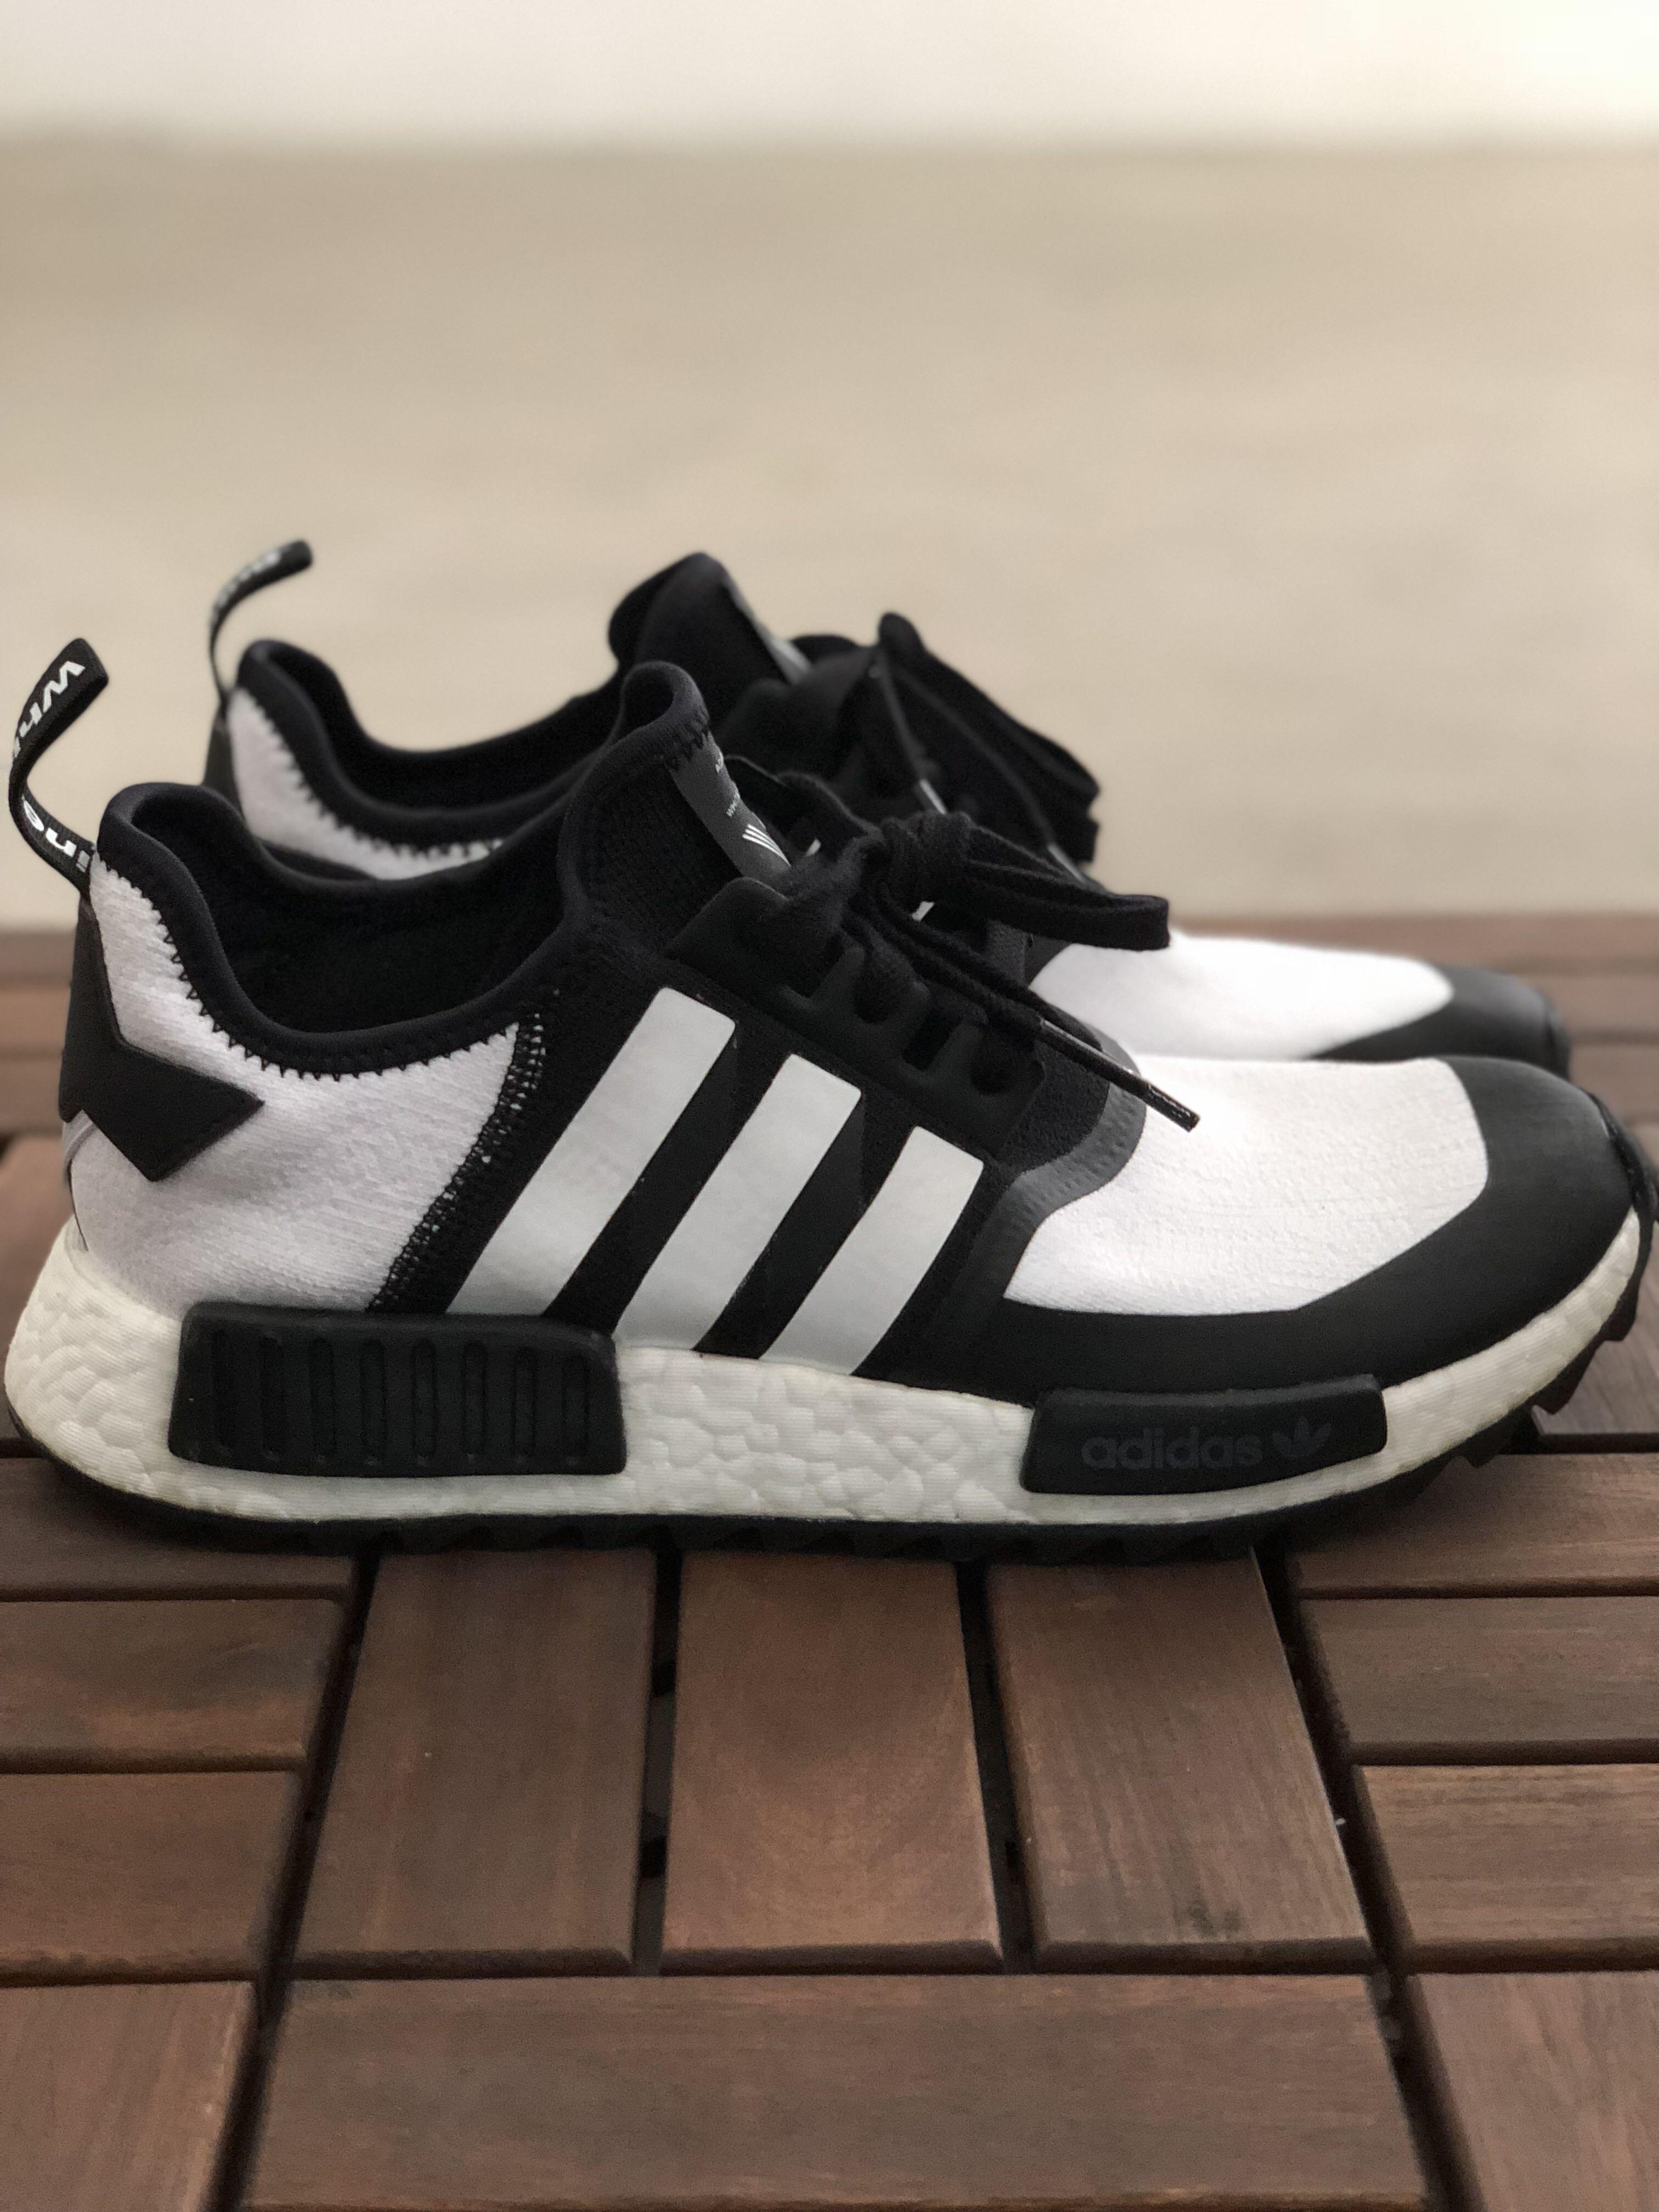 black and white nmds r1